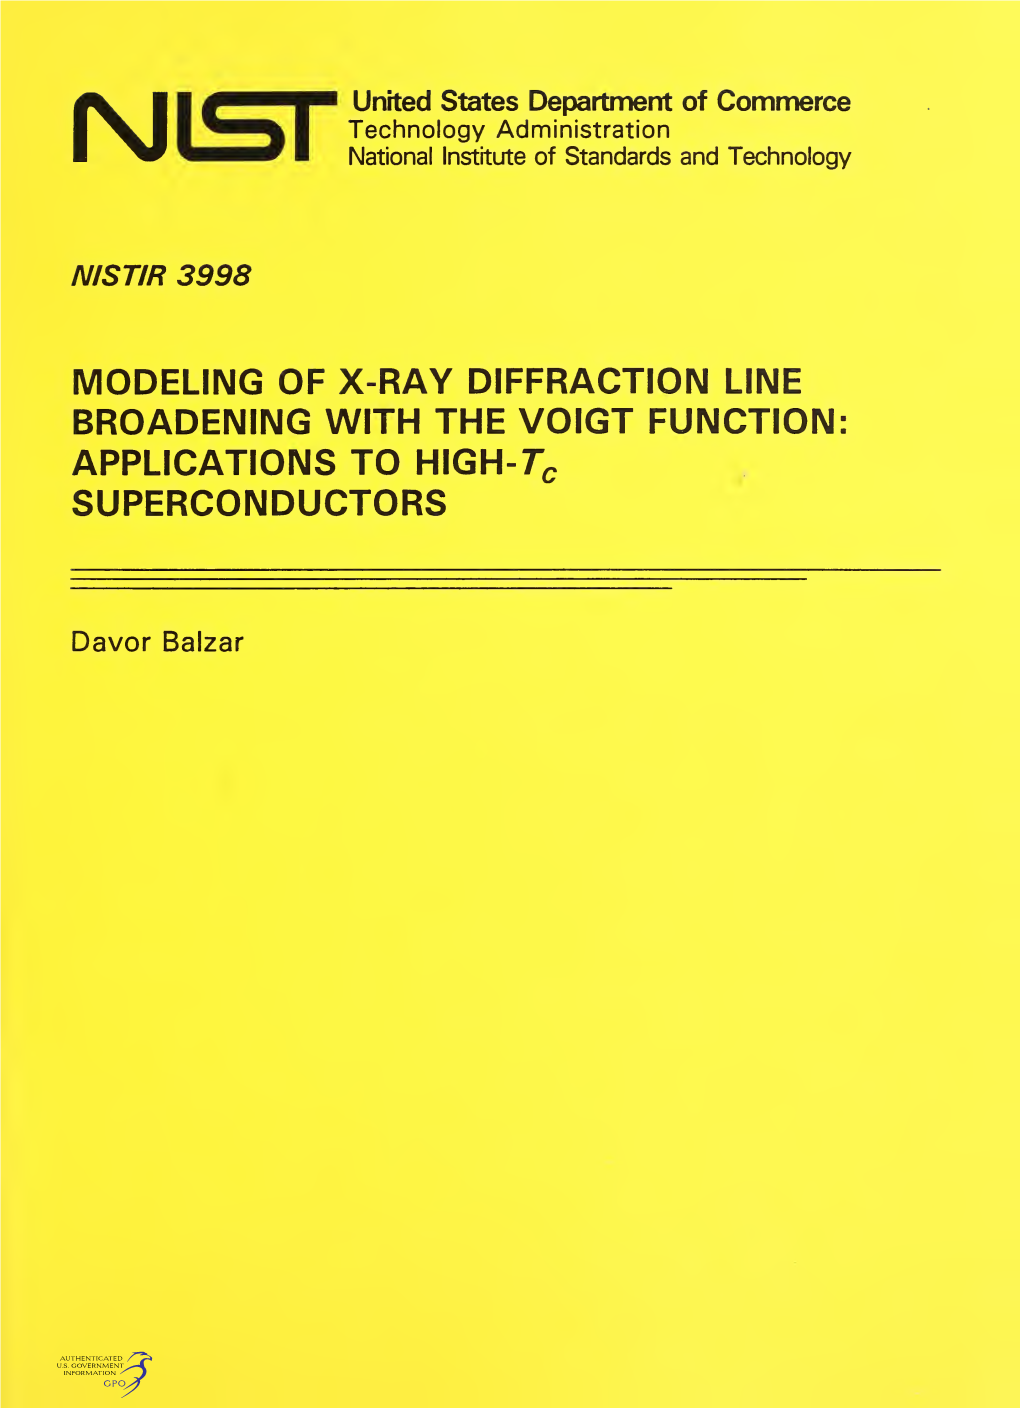 Modeling of X-Ray Diffraction Line Broadening with Voigt Function